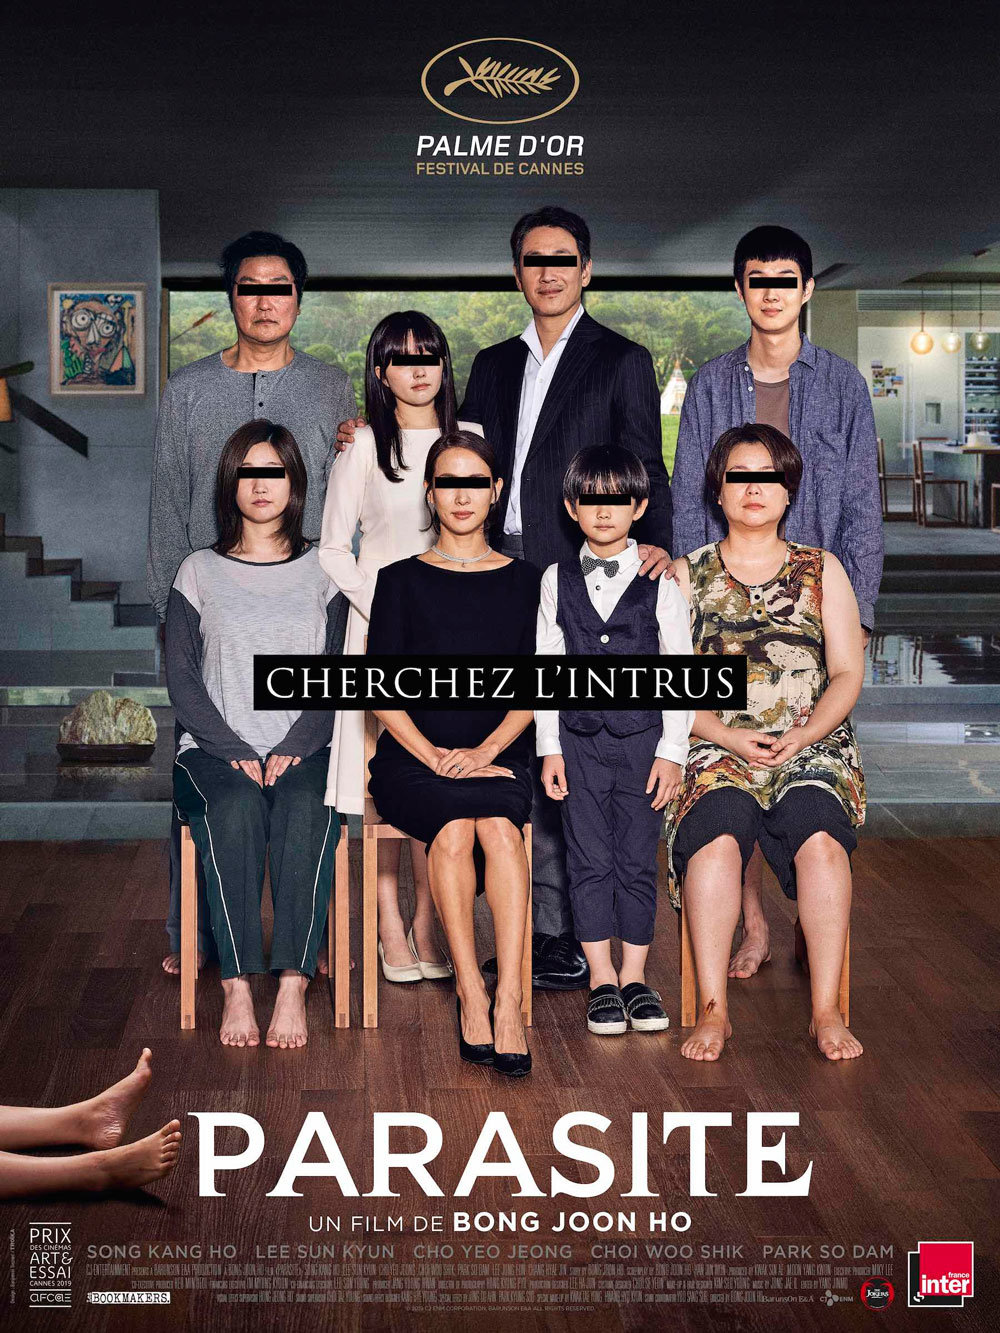 Parasite Movie Review: Bong Joon ho's provocative take on class difference is a masterpiece move